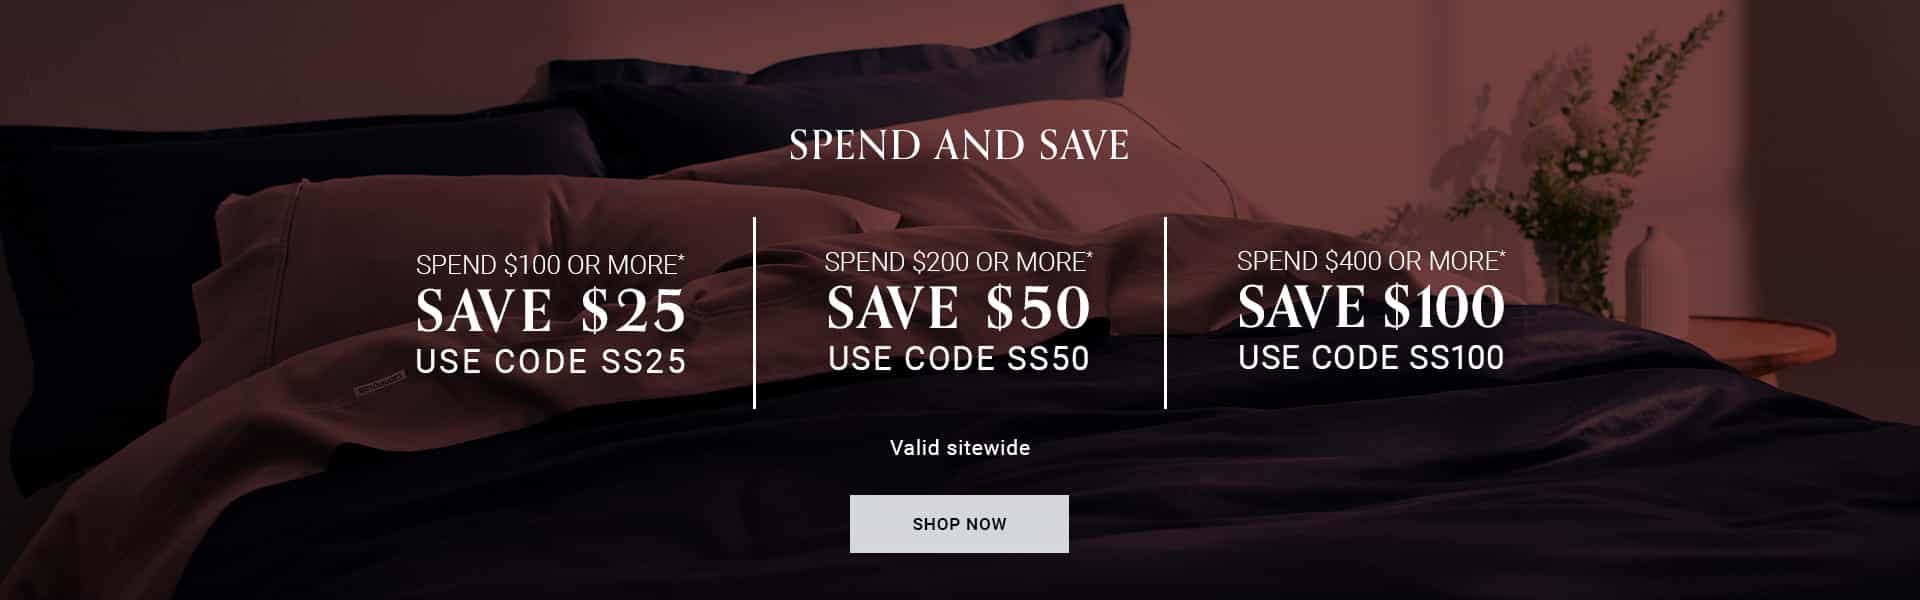 Spend & save - Score Up to $100 OFF